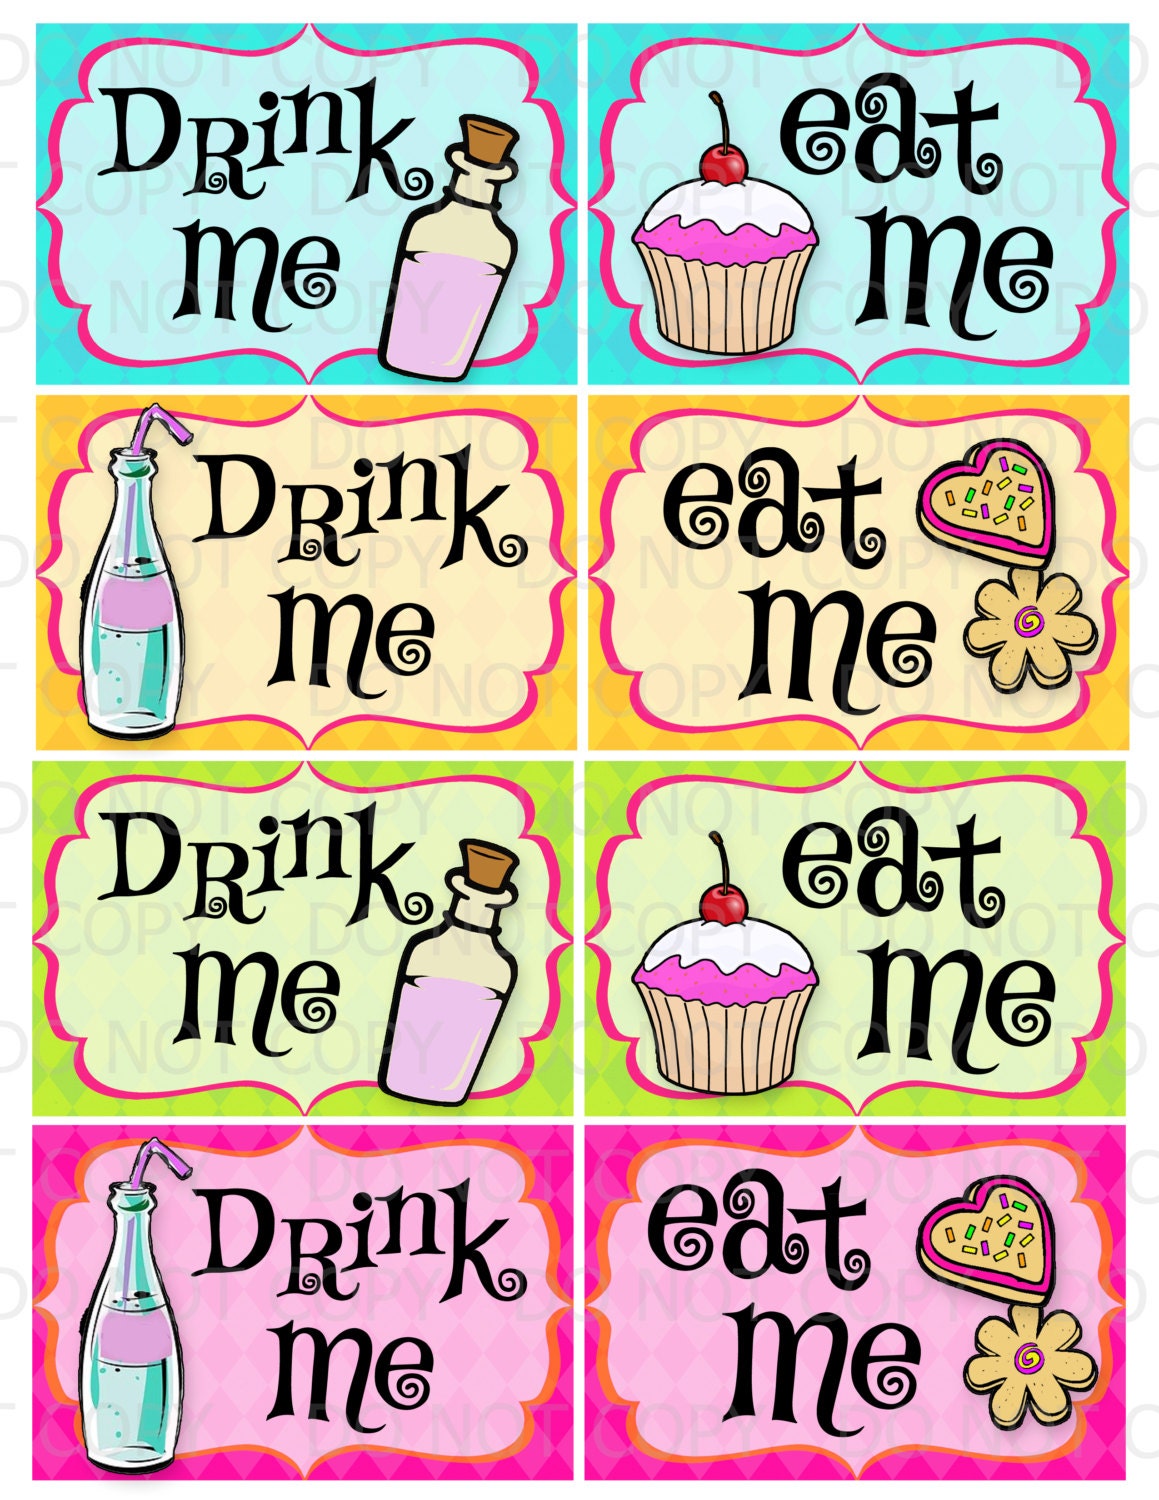 free-printable-drink-me-tags-mad-hatter-tea-party-invitations-alice